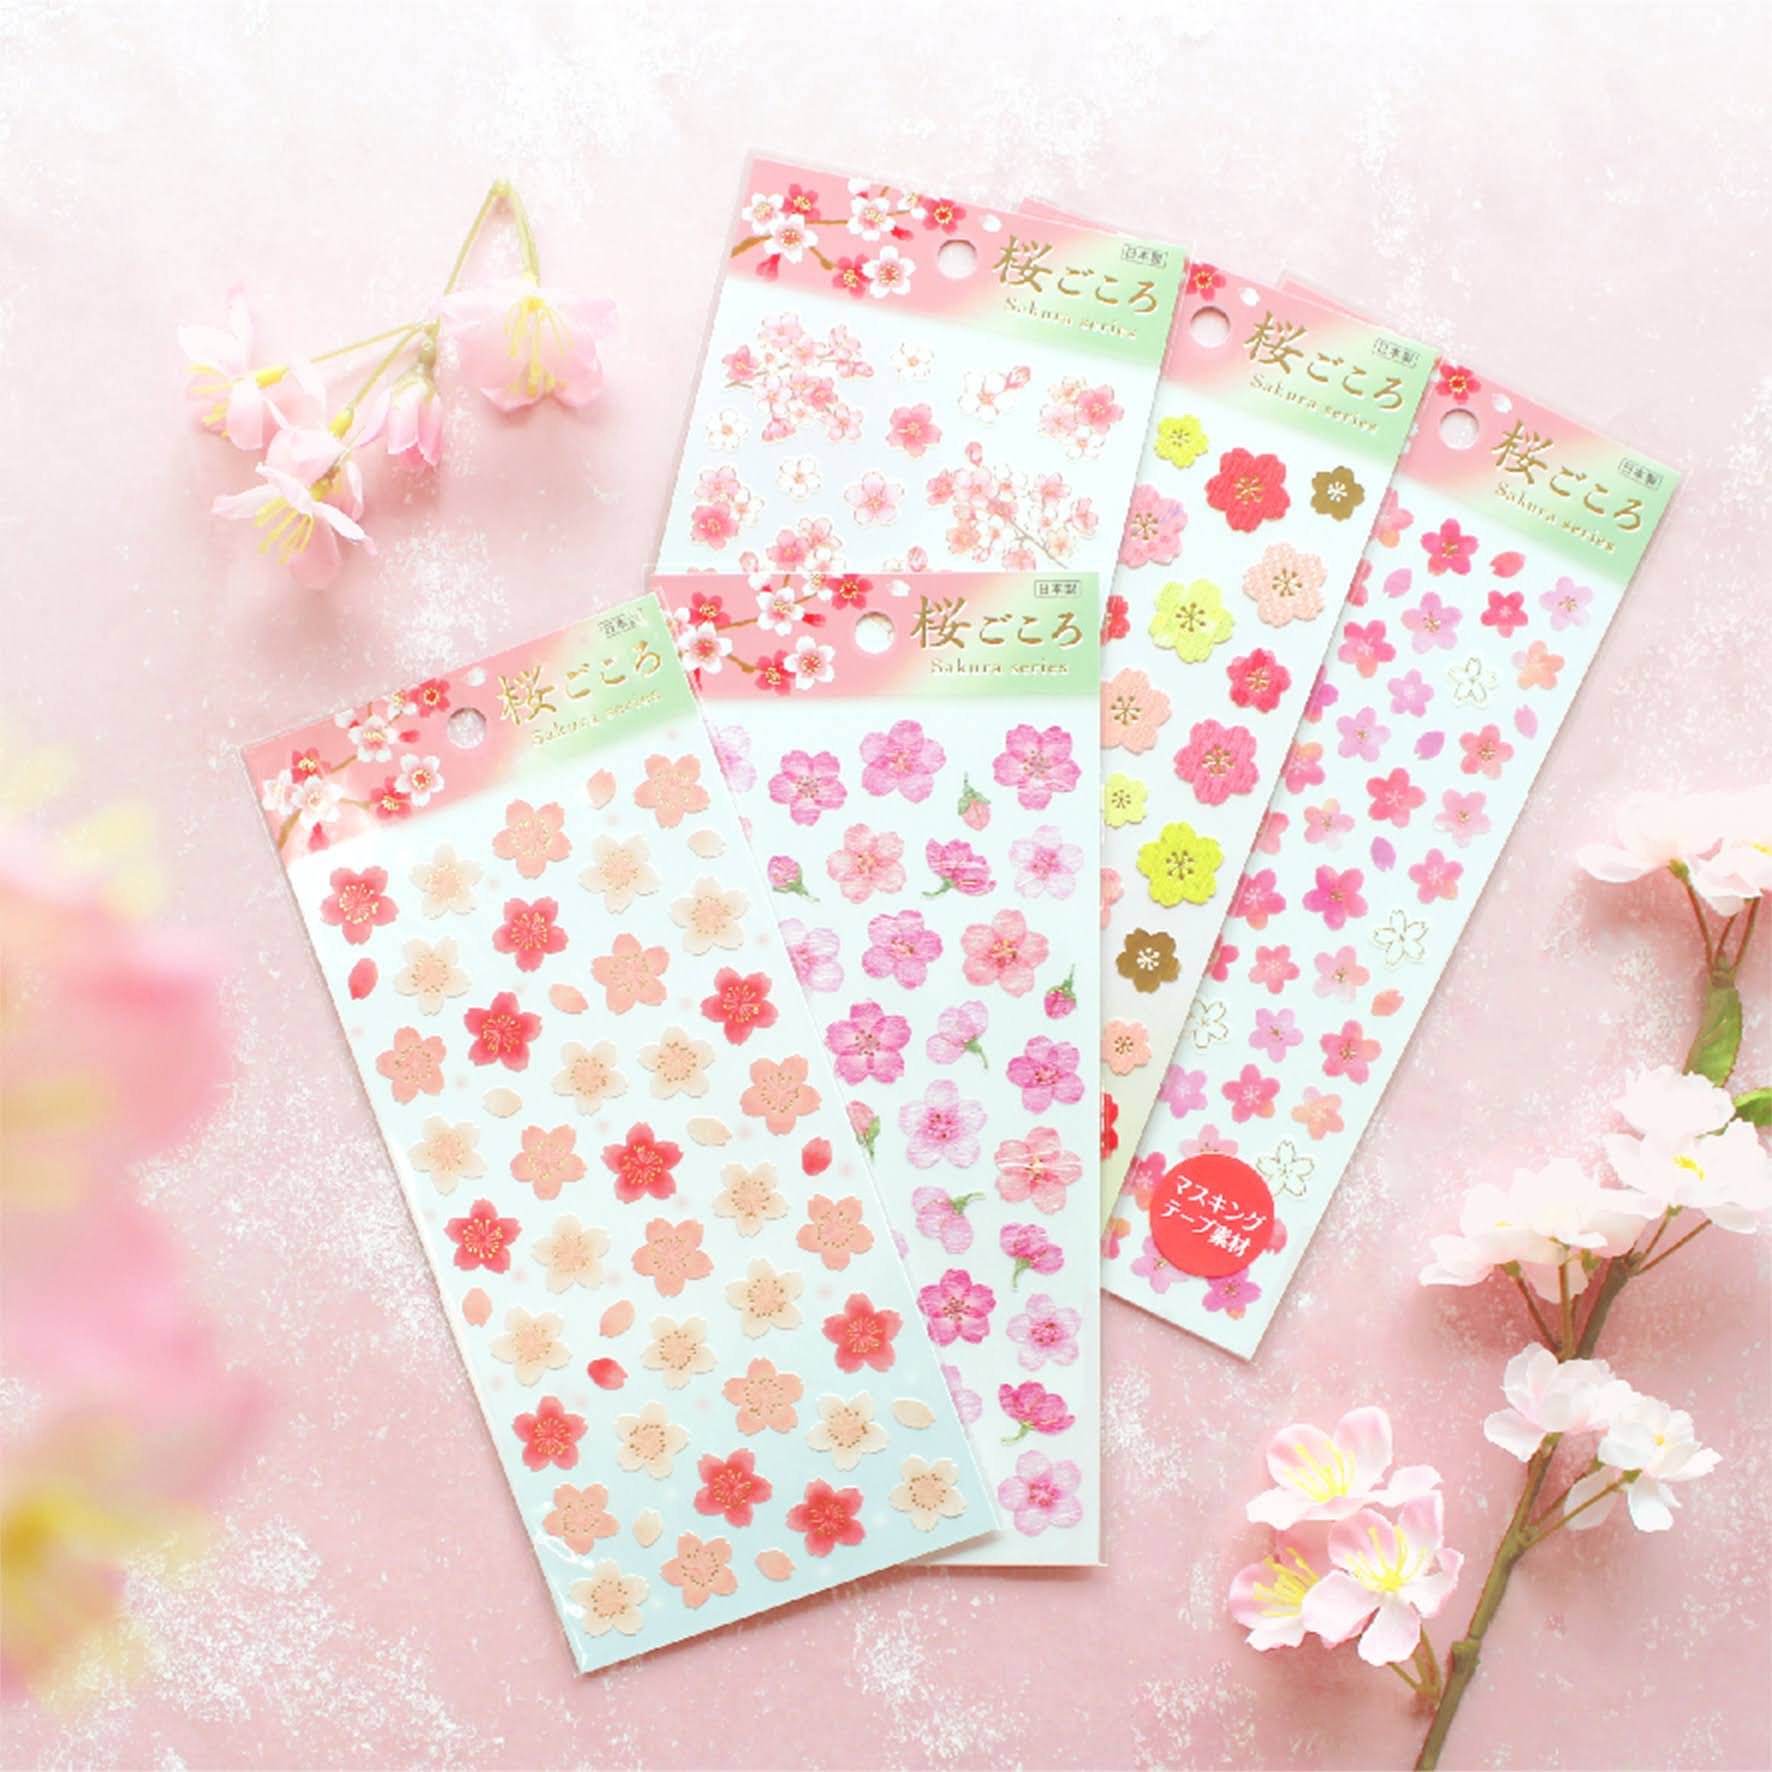 Mind Wave Sakura Washi Stickers  These delicate paper stickers with foil details feature delicate cherry blossom designs, perfect for bringing a touch of spring to your projects.